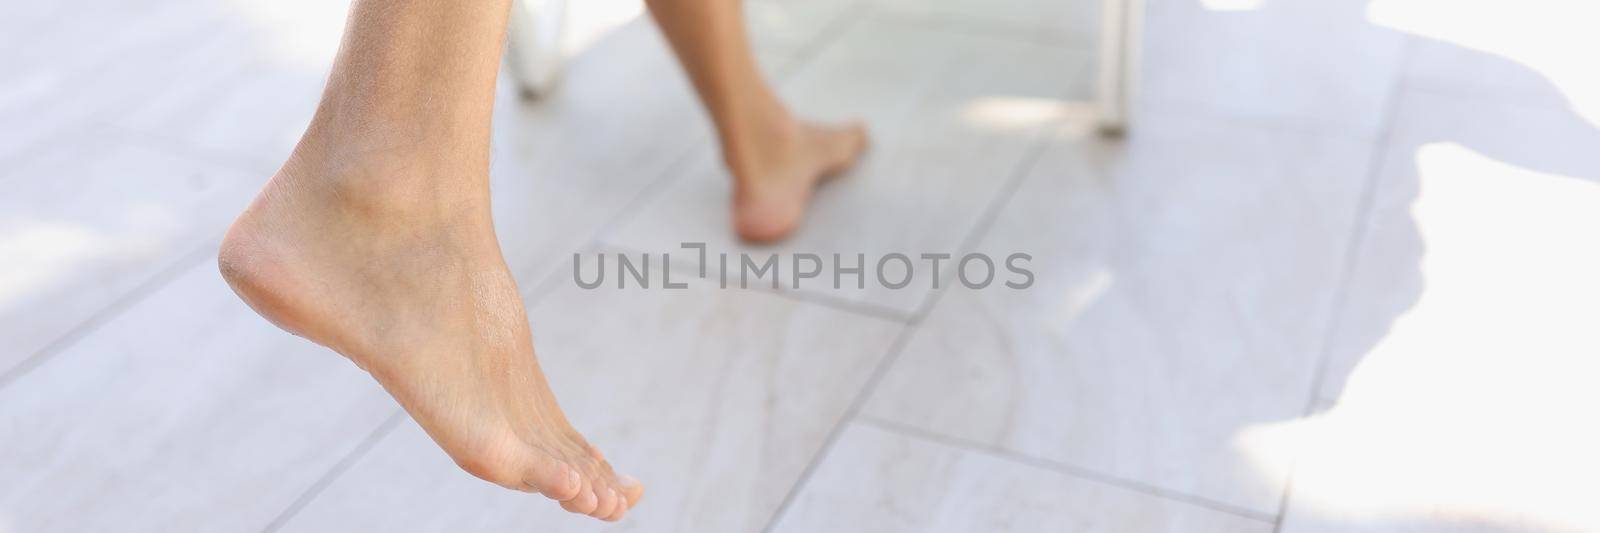 Close-up of persons feet step on tile near pool, barefoot man with hairy legs. Tanned body skin, enjoy summer vacation, hot days. Holiday, resort, summertime, chill concept